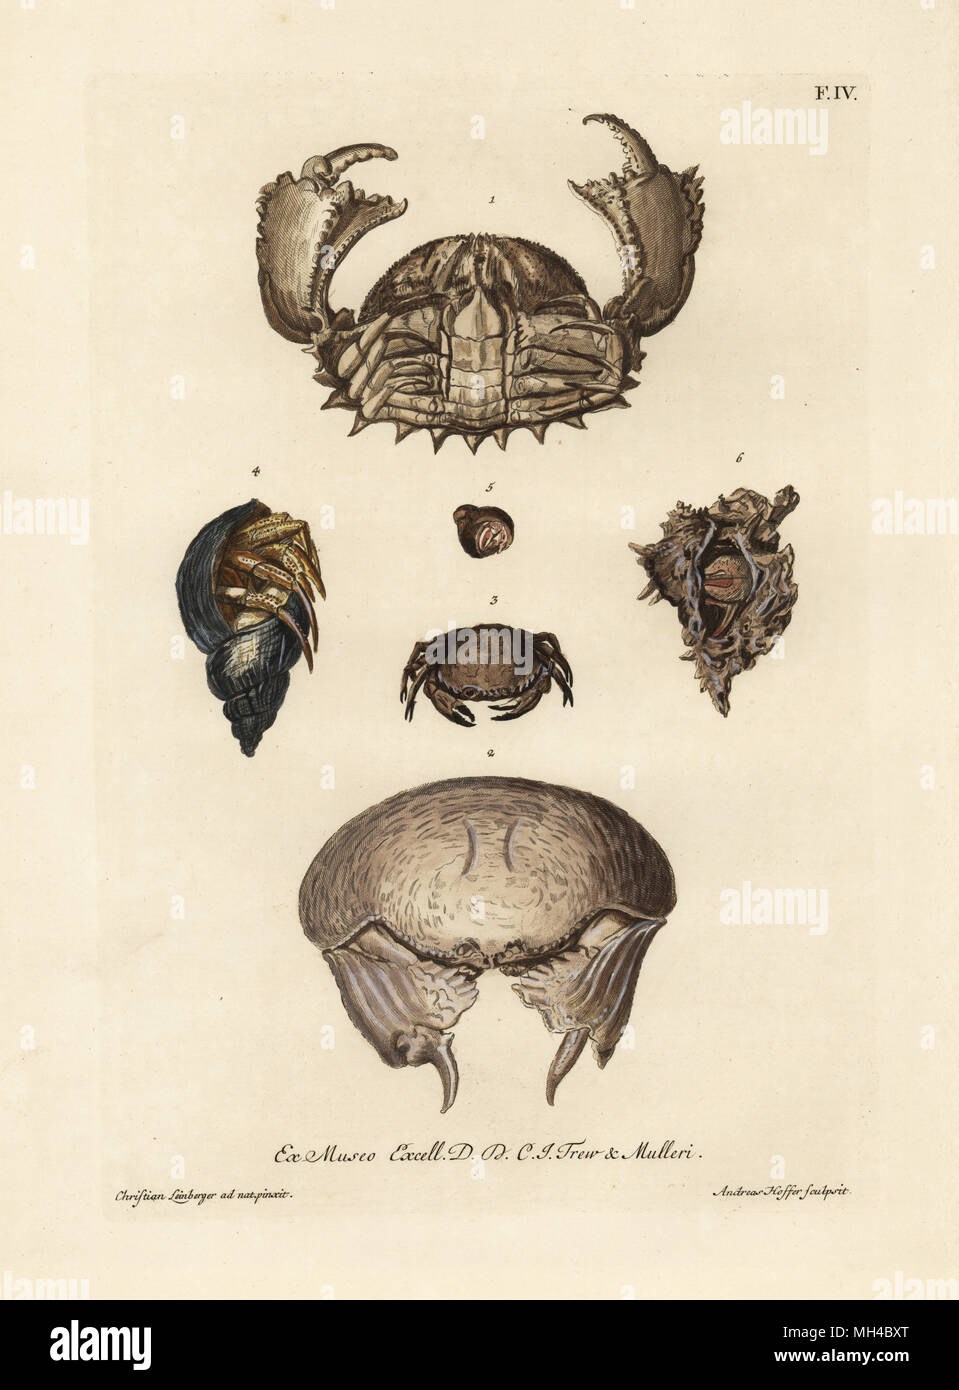 Box crab, Calappa hepatica 1, giant box crab, Calappa calappa 2, floral egg crab, Atergatis floridus 3, Diogenes hermit crab, Diogenes pugilator 4,5, and soldier crab, Pagurus bernhardus 6. Handcoloured copperplate engraving by Andreas Hoffer after an illustration by Christian Leinberger from Georg Wolfgang Knorr's Deliciae Naturae Selectae of Kabinet van Zeldzaamheden der Natuur, Blusse and Son, Nuremberg, 1771. Specimens from a Wunderkammer or Cabinet of Curiosities owned by Dr. Christoph Jacob Trew in Nuremberg. Stock Photo